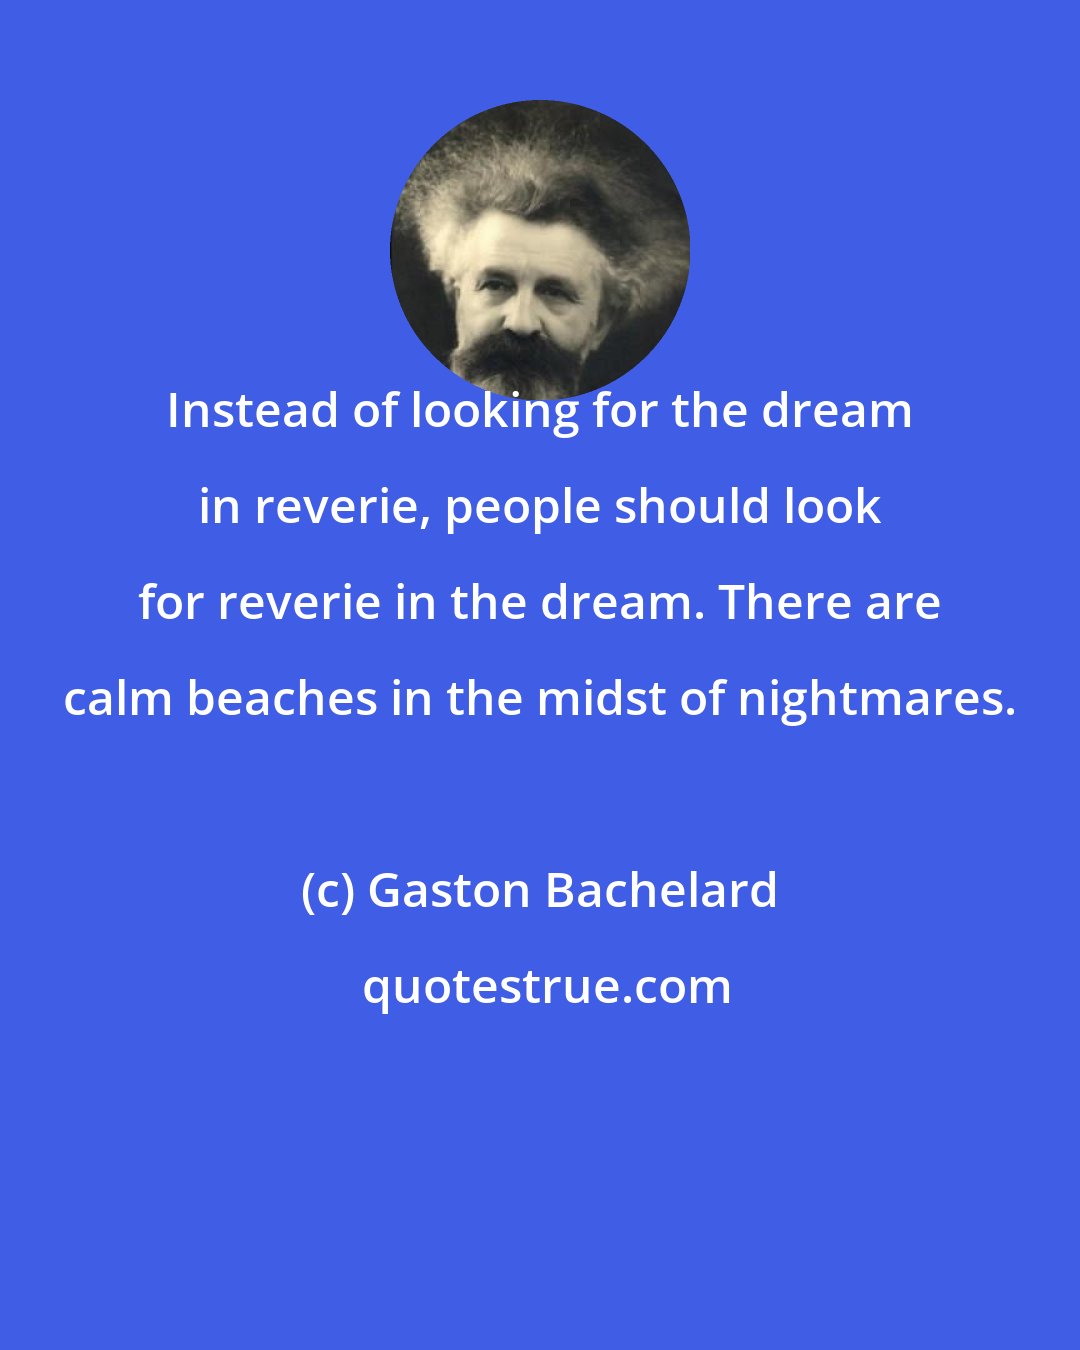 Gaston Bachelard: Instead of looking for the dream in reverie, people should look for reverie in the dream. There are calm beaches in the midst of nightmares.